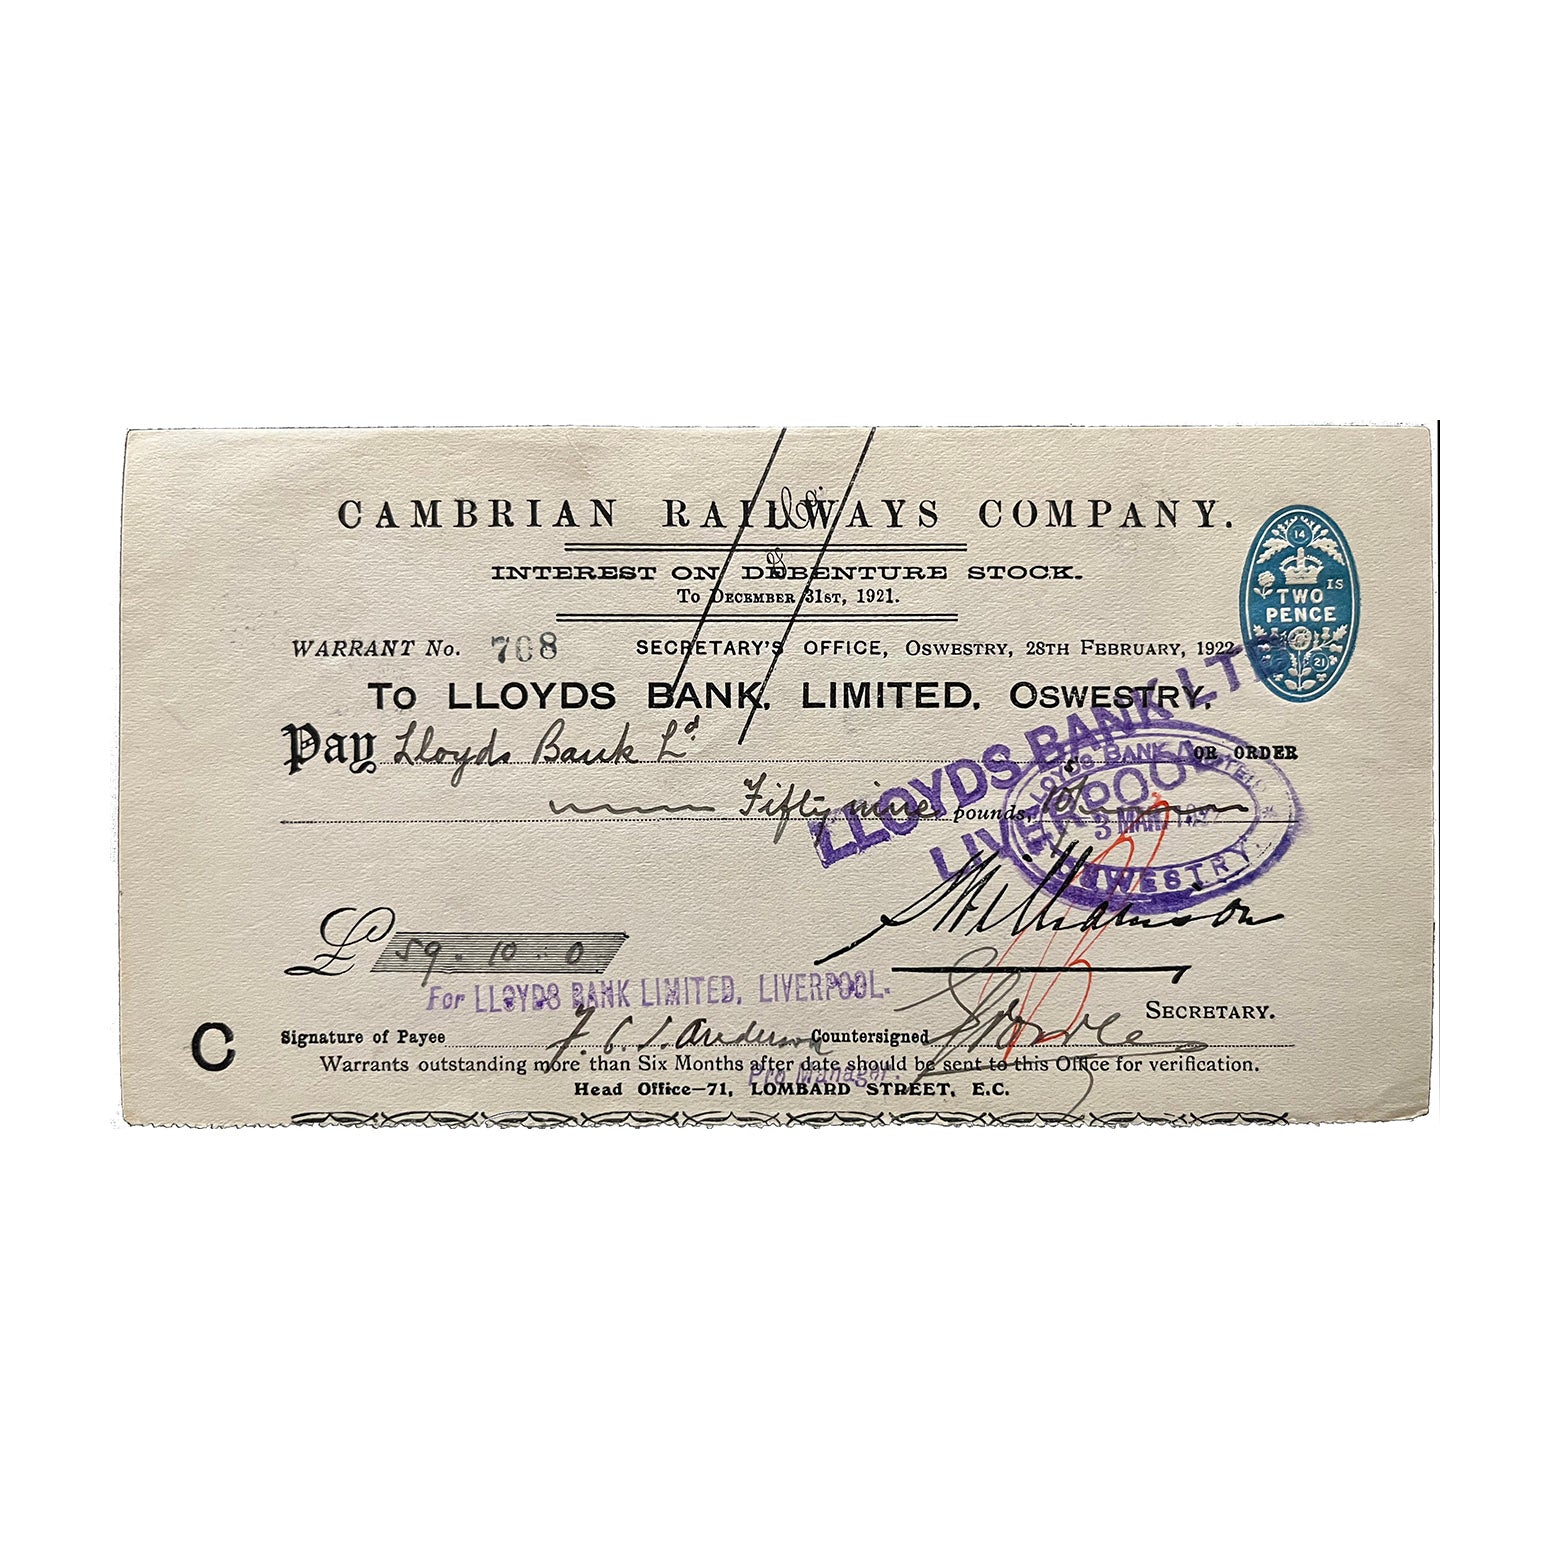 An original railway cheque, Cambrian Railways Company, for payment or interest on Debenture Stock. Dated 28 February 1922